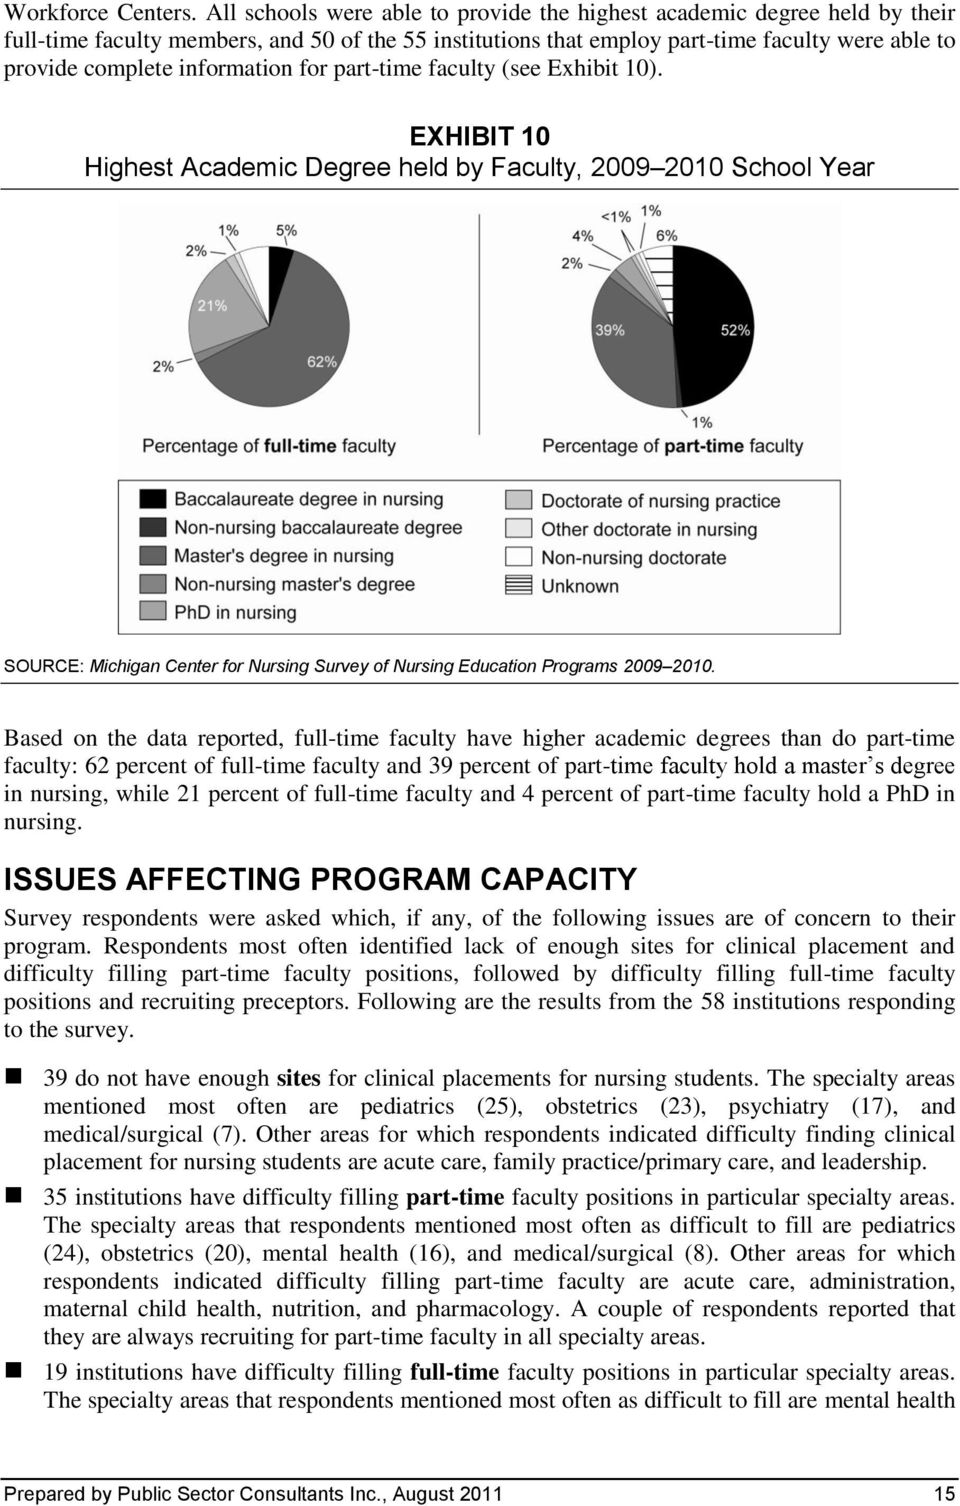 information for part-time faculty (see Exhibit 10).